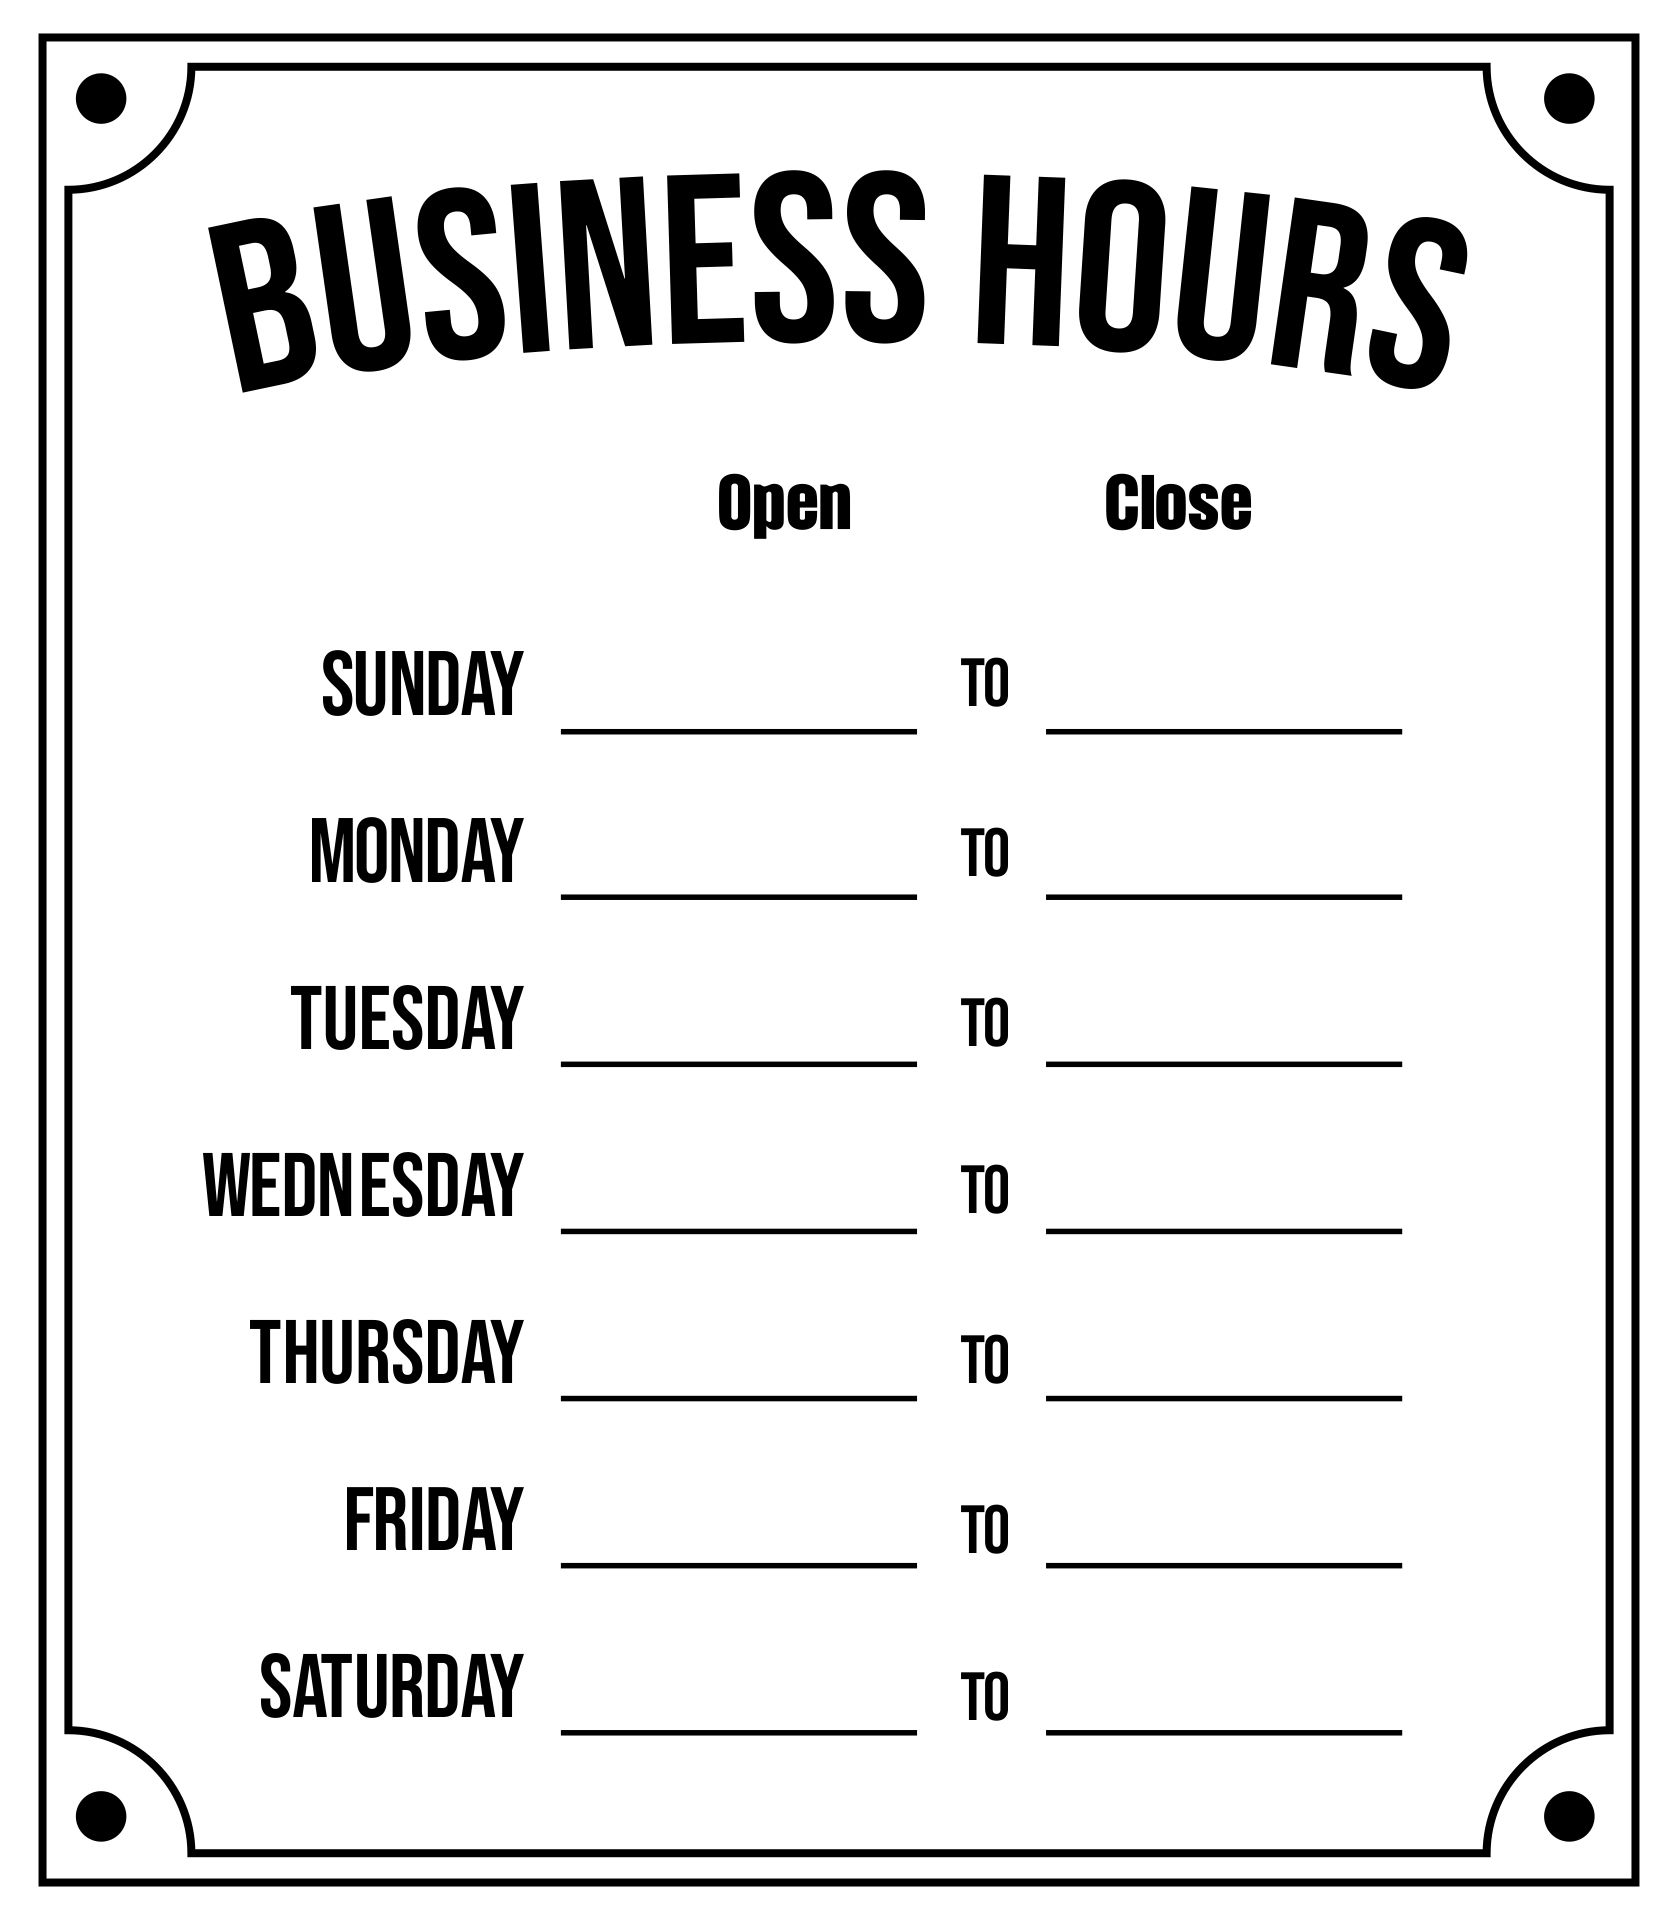 printable-business-hours-sign-template-free-printable-templates